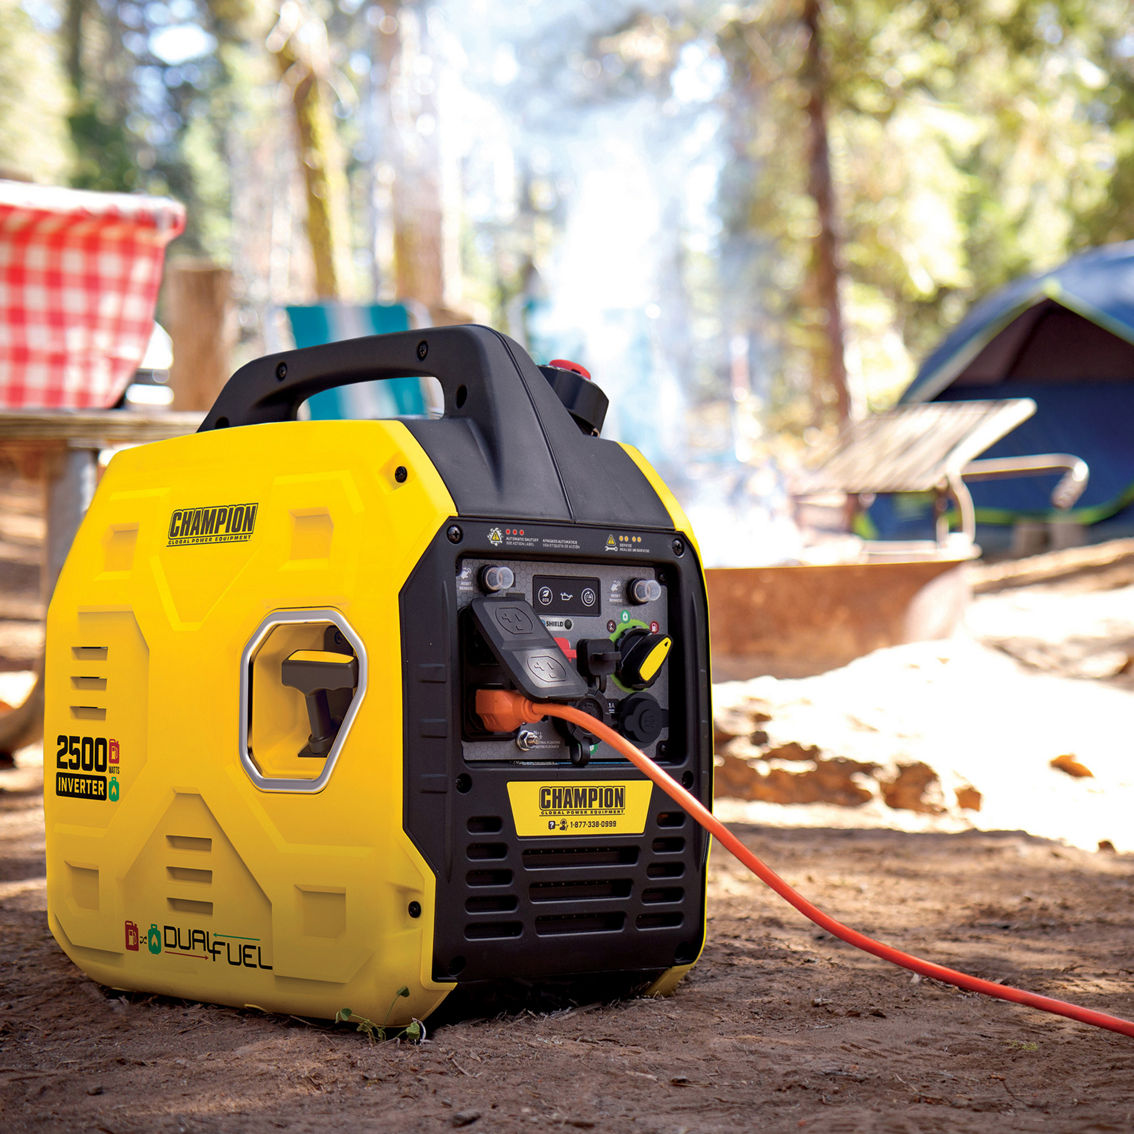 Champion 2500W Ultralight Portable Dual Fuel Inverter Generator with CO Shield - Image 5 of 10